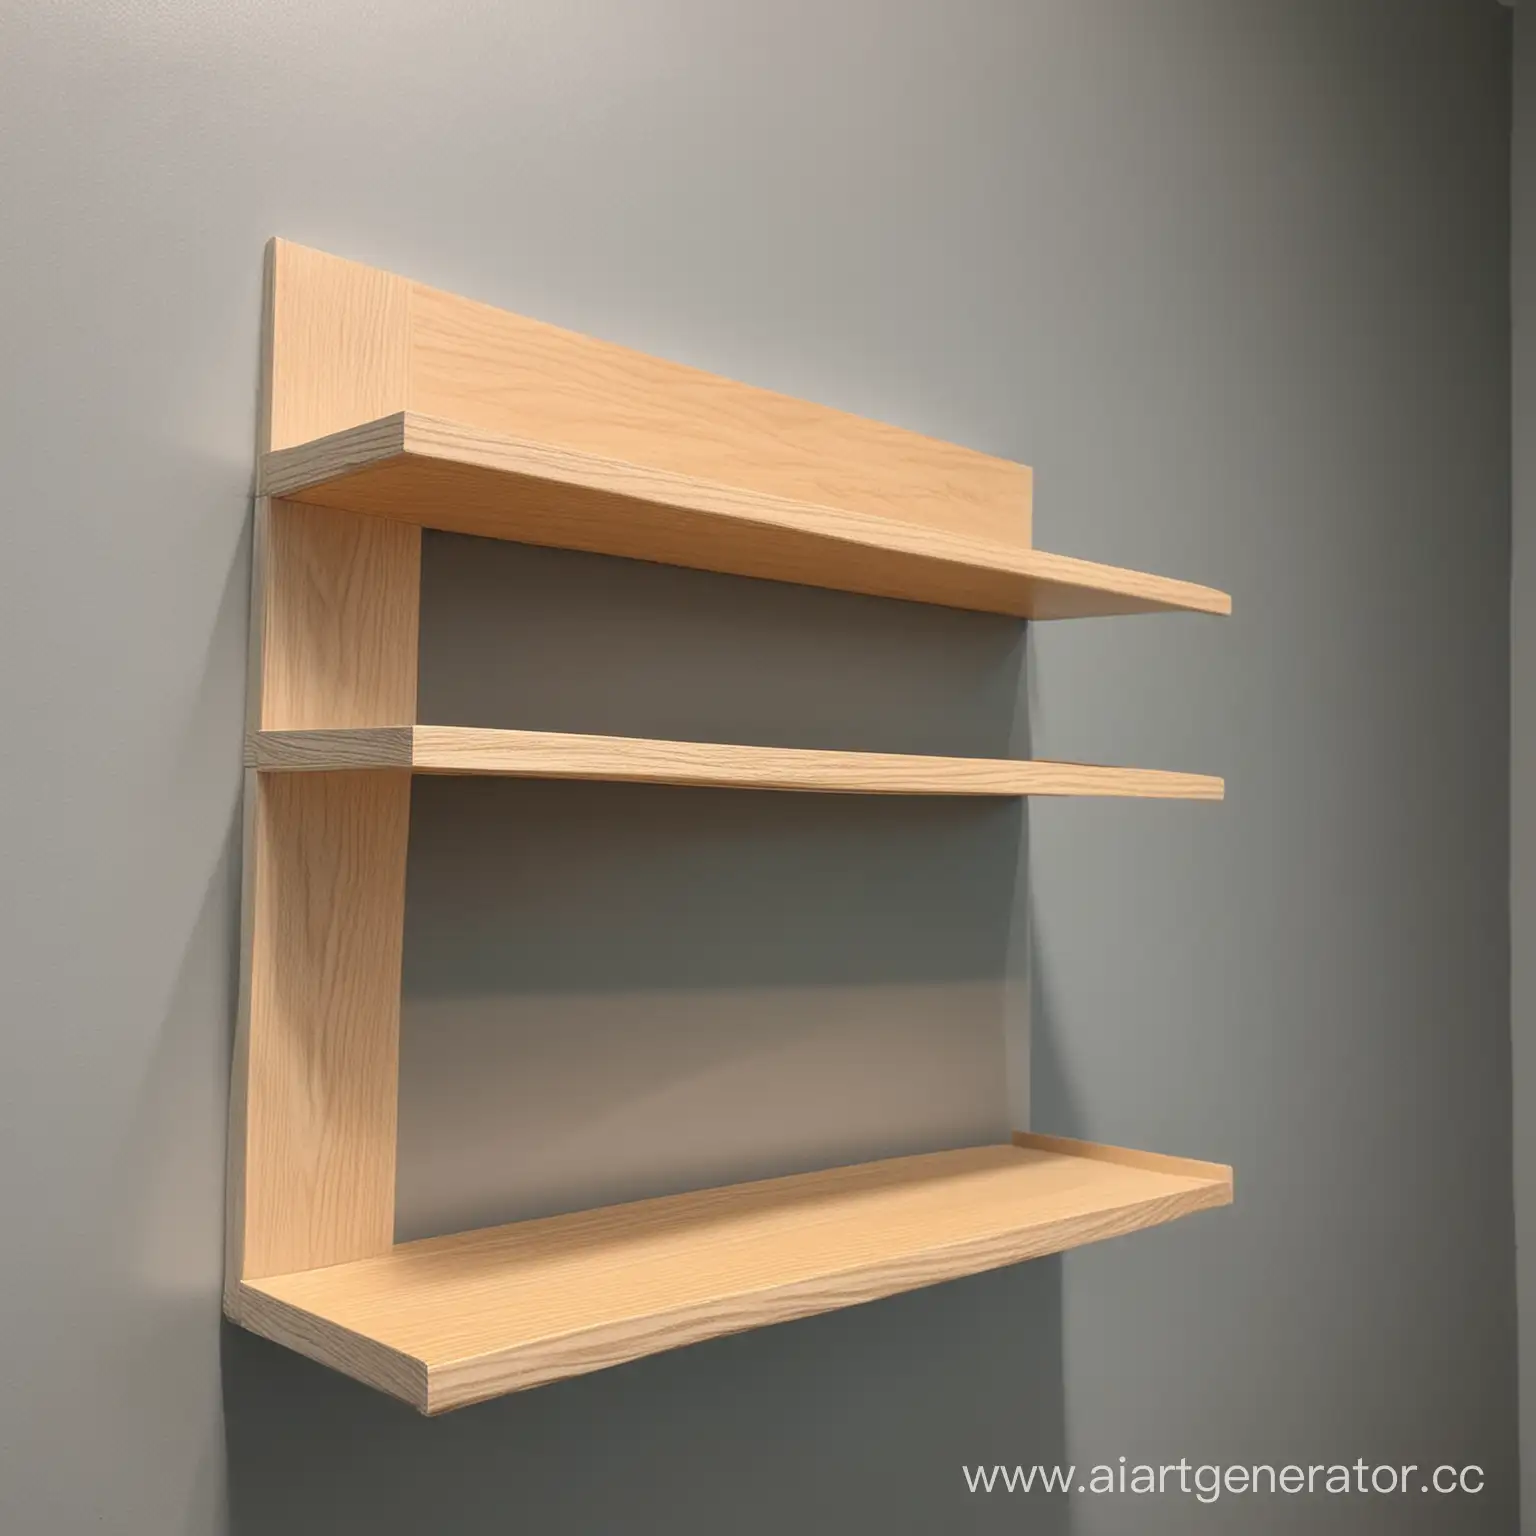 the shelf is empty at an angle
